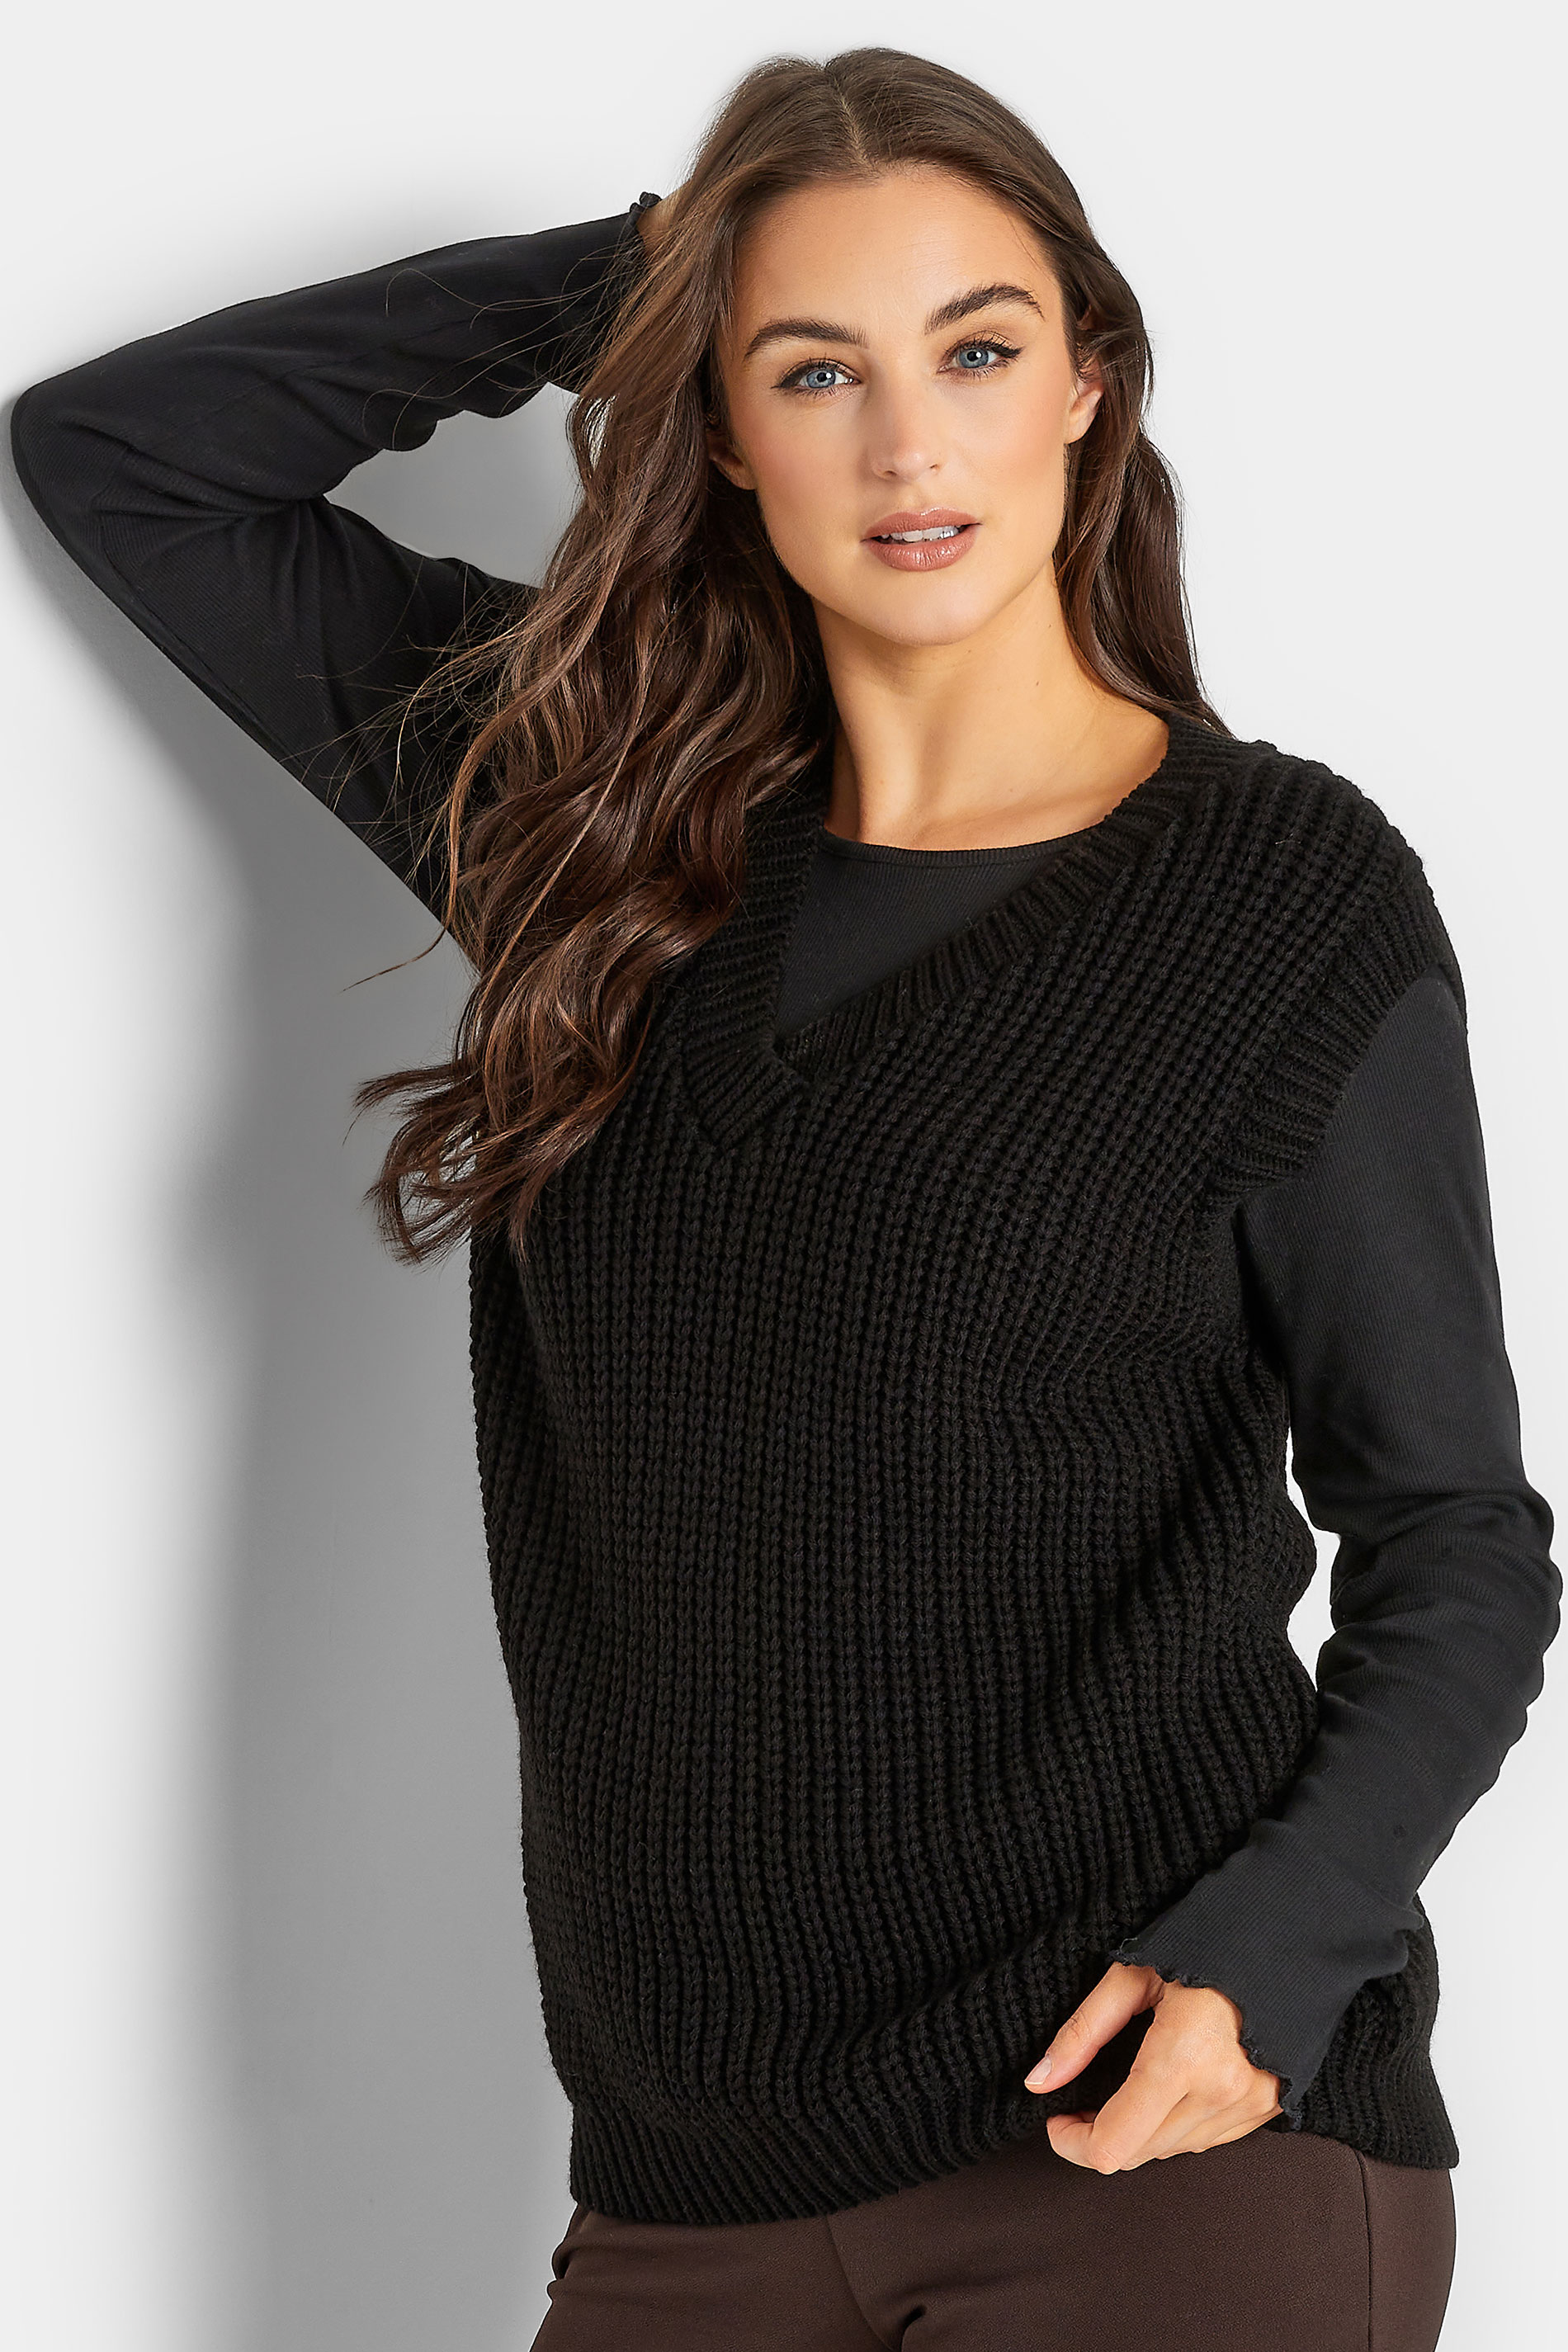 LTS Tall Women's Black Knitted Vest Top  | Long Tall Sally  1